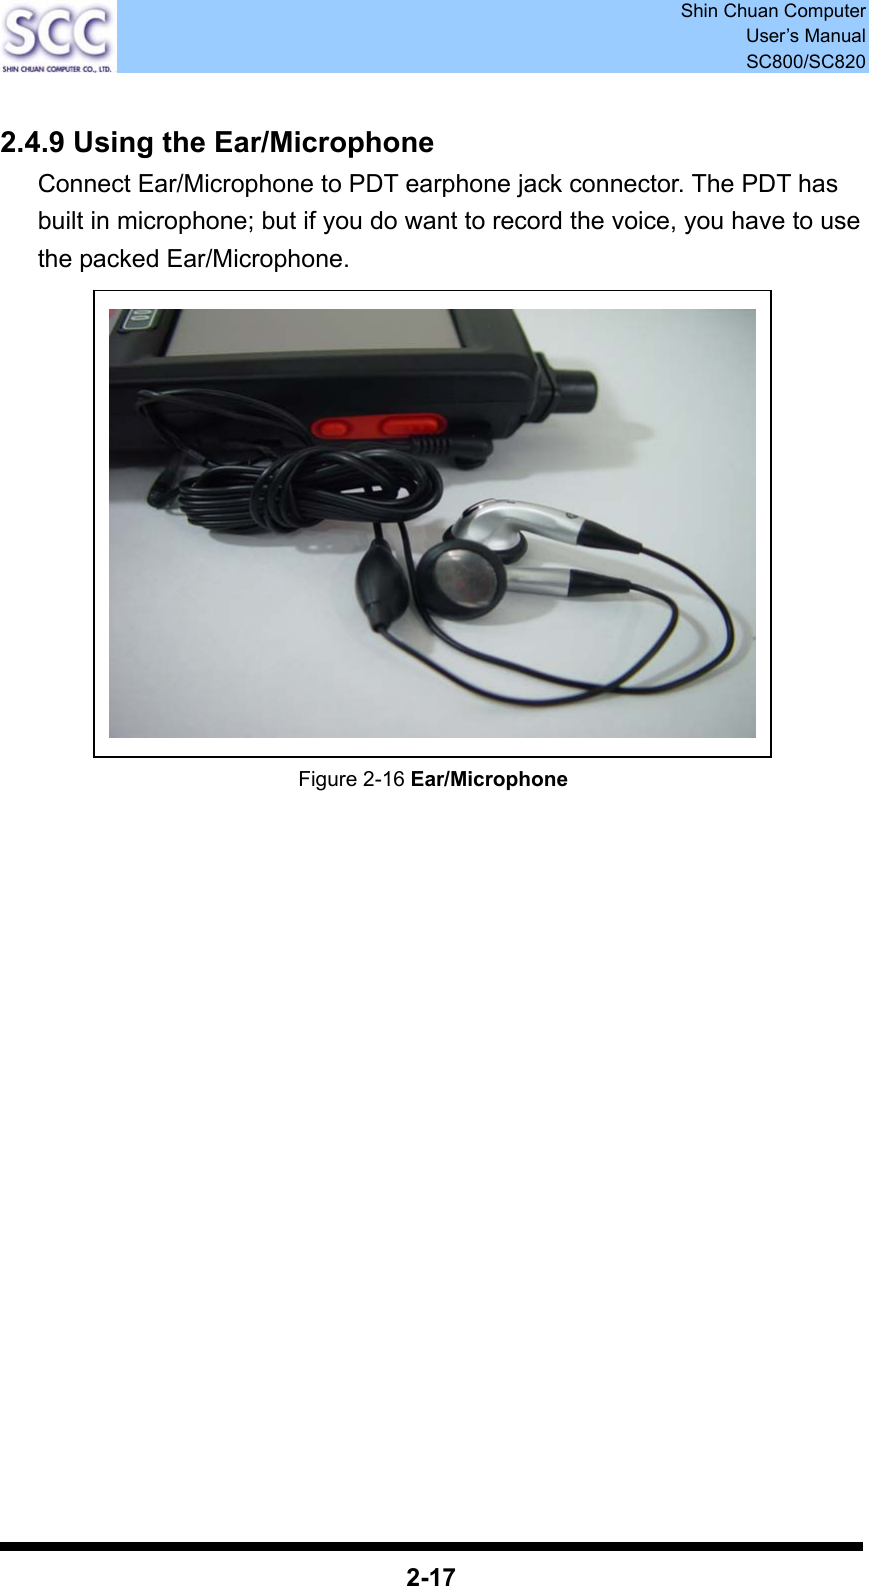  Shin Chuan Computer User’s Manual SC800/SC820  2-17  2.4.9 Using the Ear/Microphone Connect Ear/Microphone to PDT earphone jack connector. The PDT has built in microphone; but if you do want to record the voice, you have to use the packed Ear/Microphone.              Figure 2-16 Ear/Microphone                   